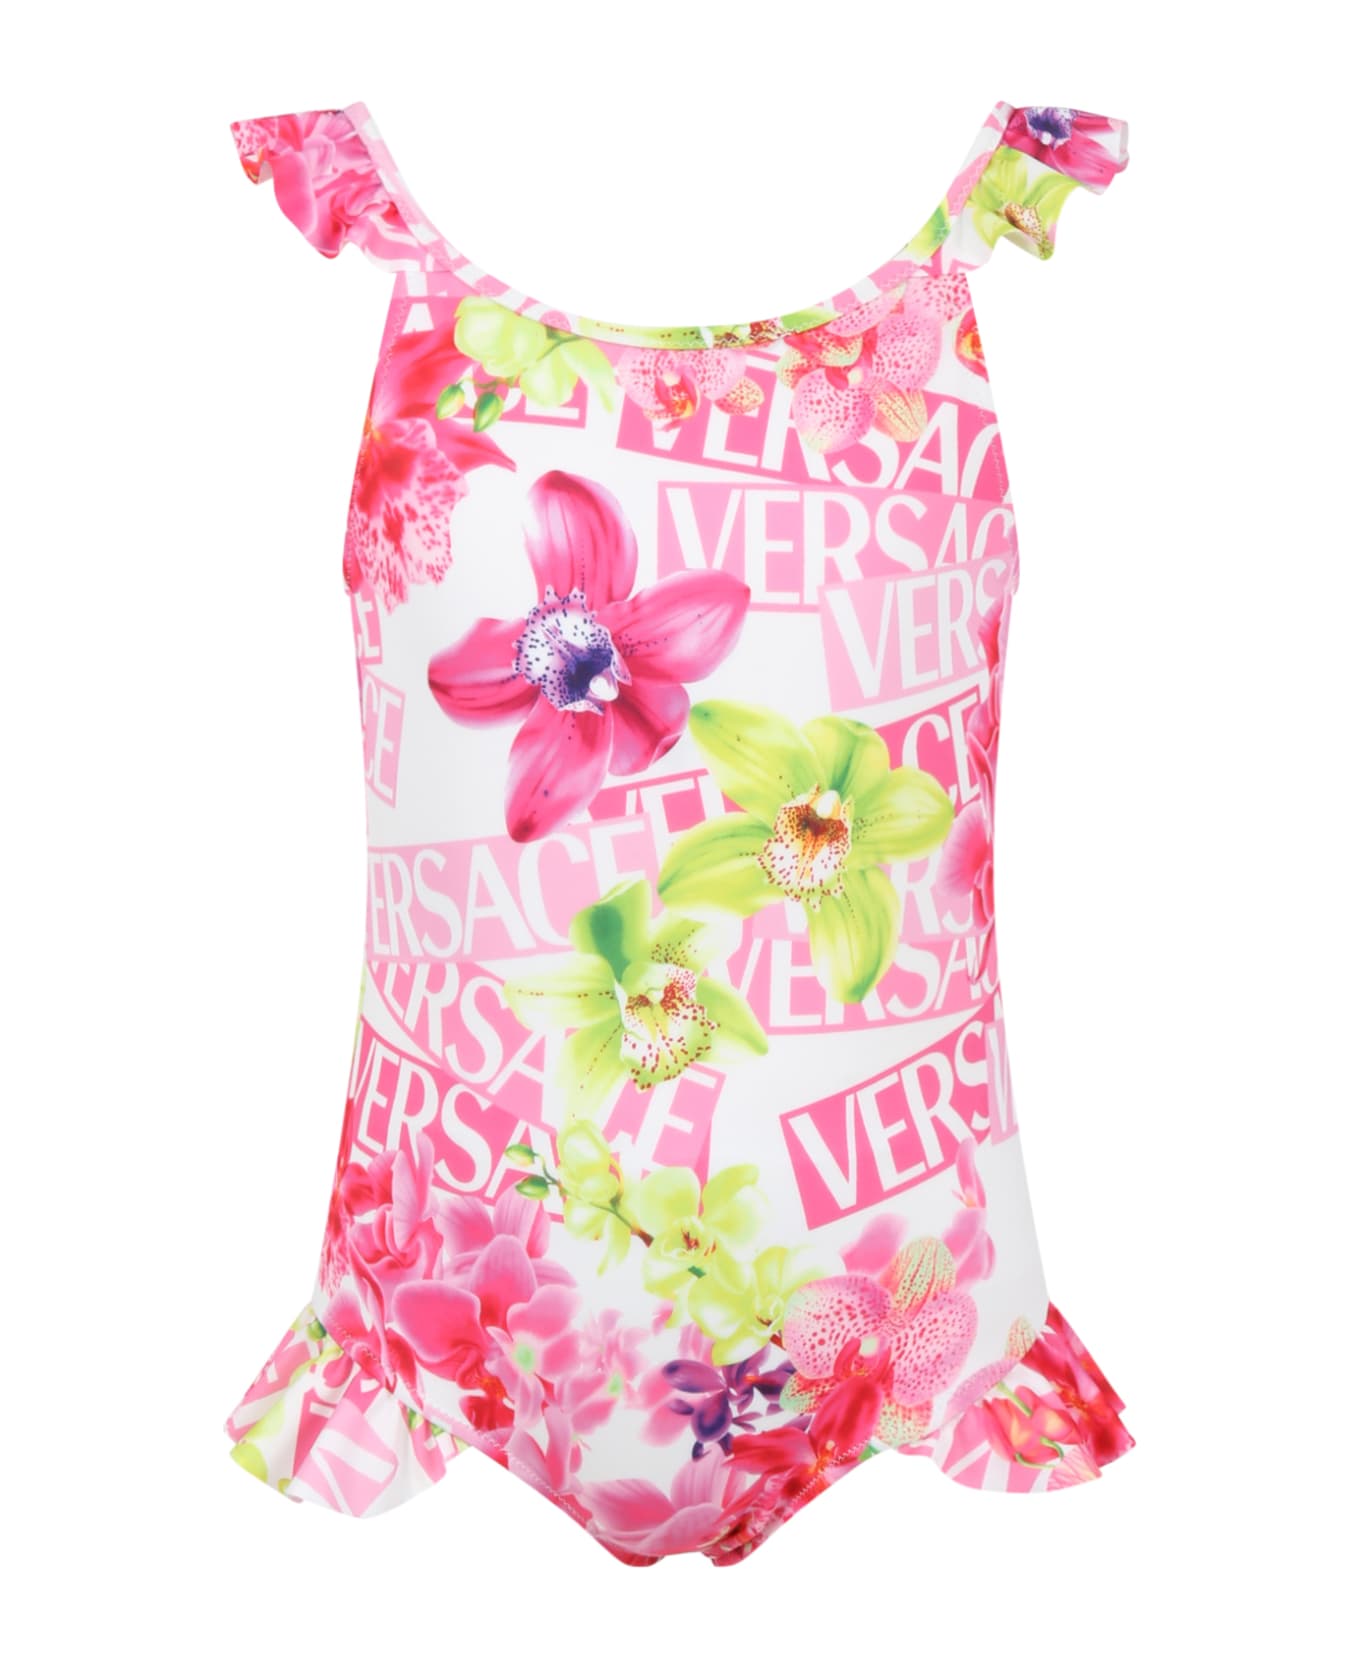 Versace White Swimsuite For Girl With Floral Print And Logo All-over - Multicolor 水着